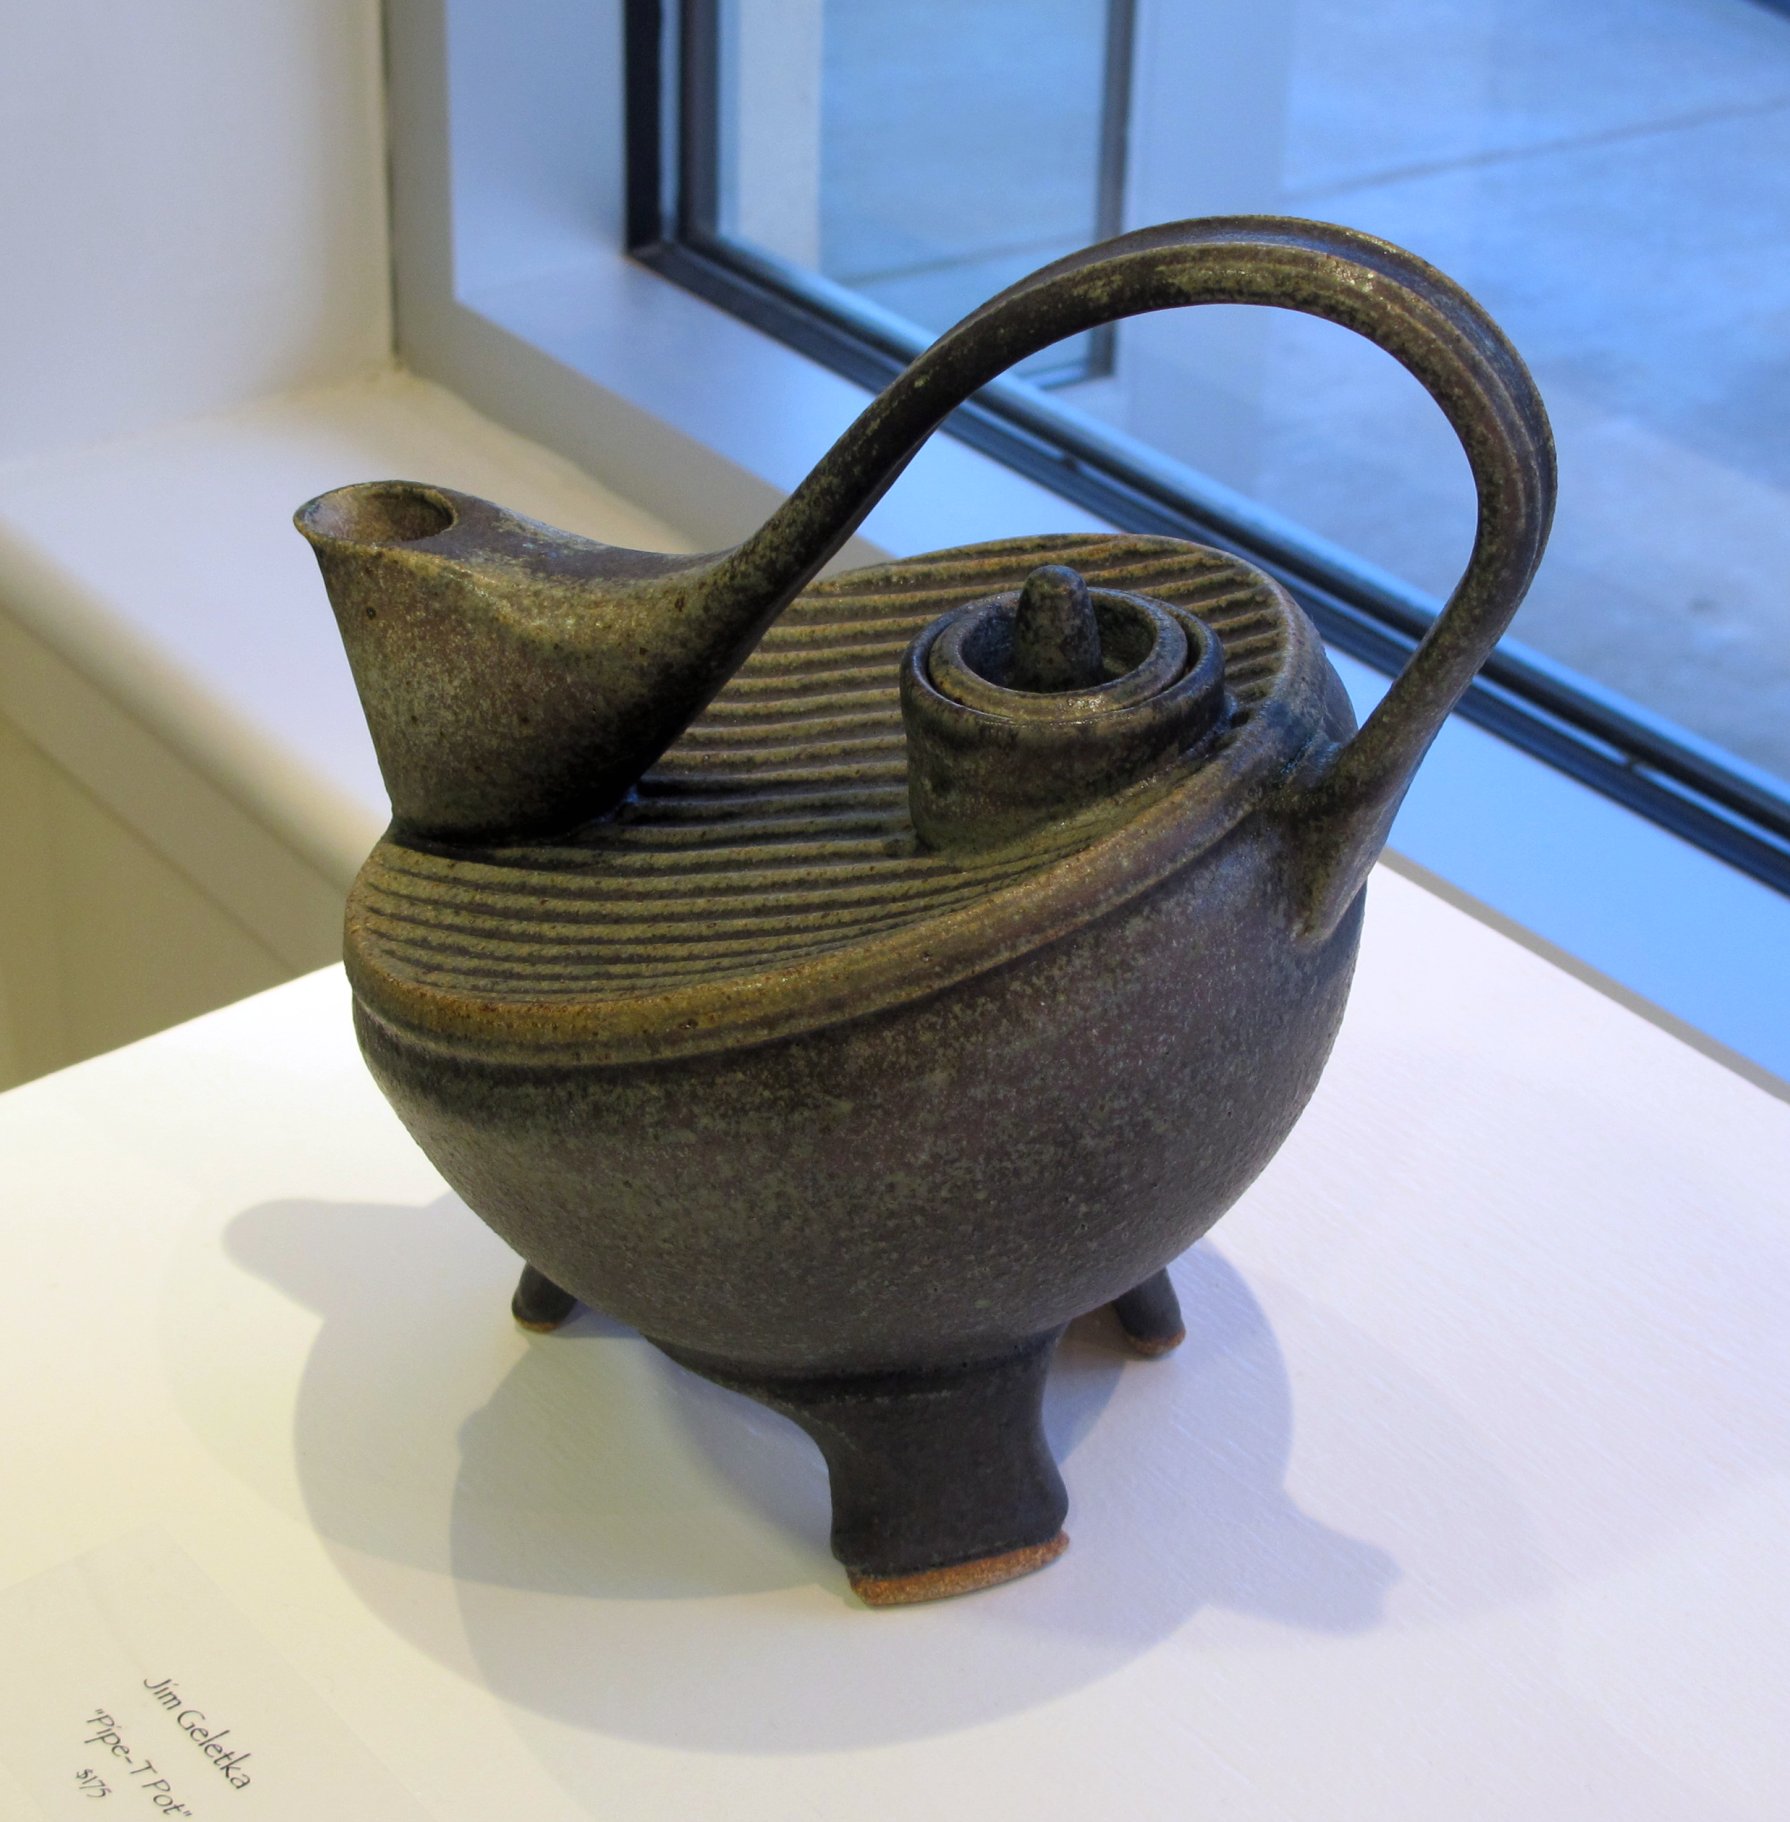 a pottery vessel is sitting on display near a window